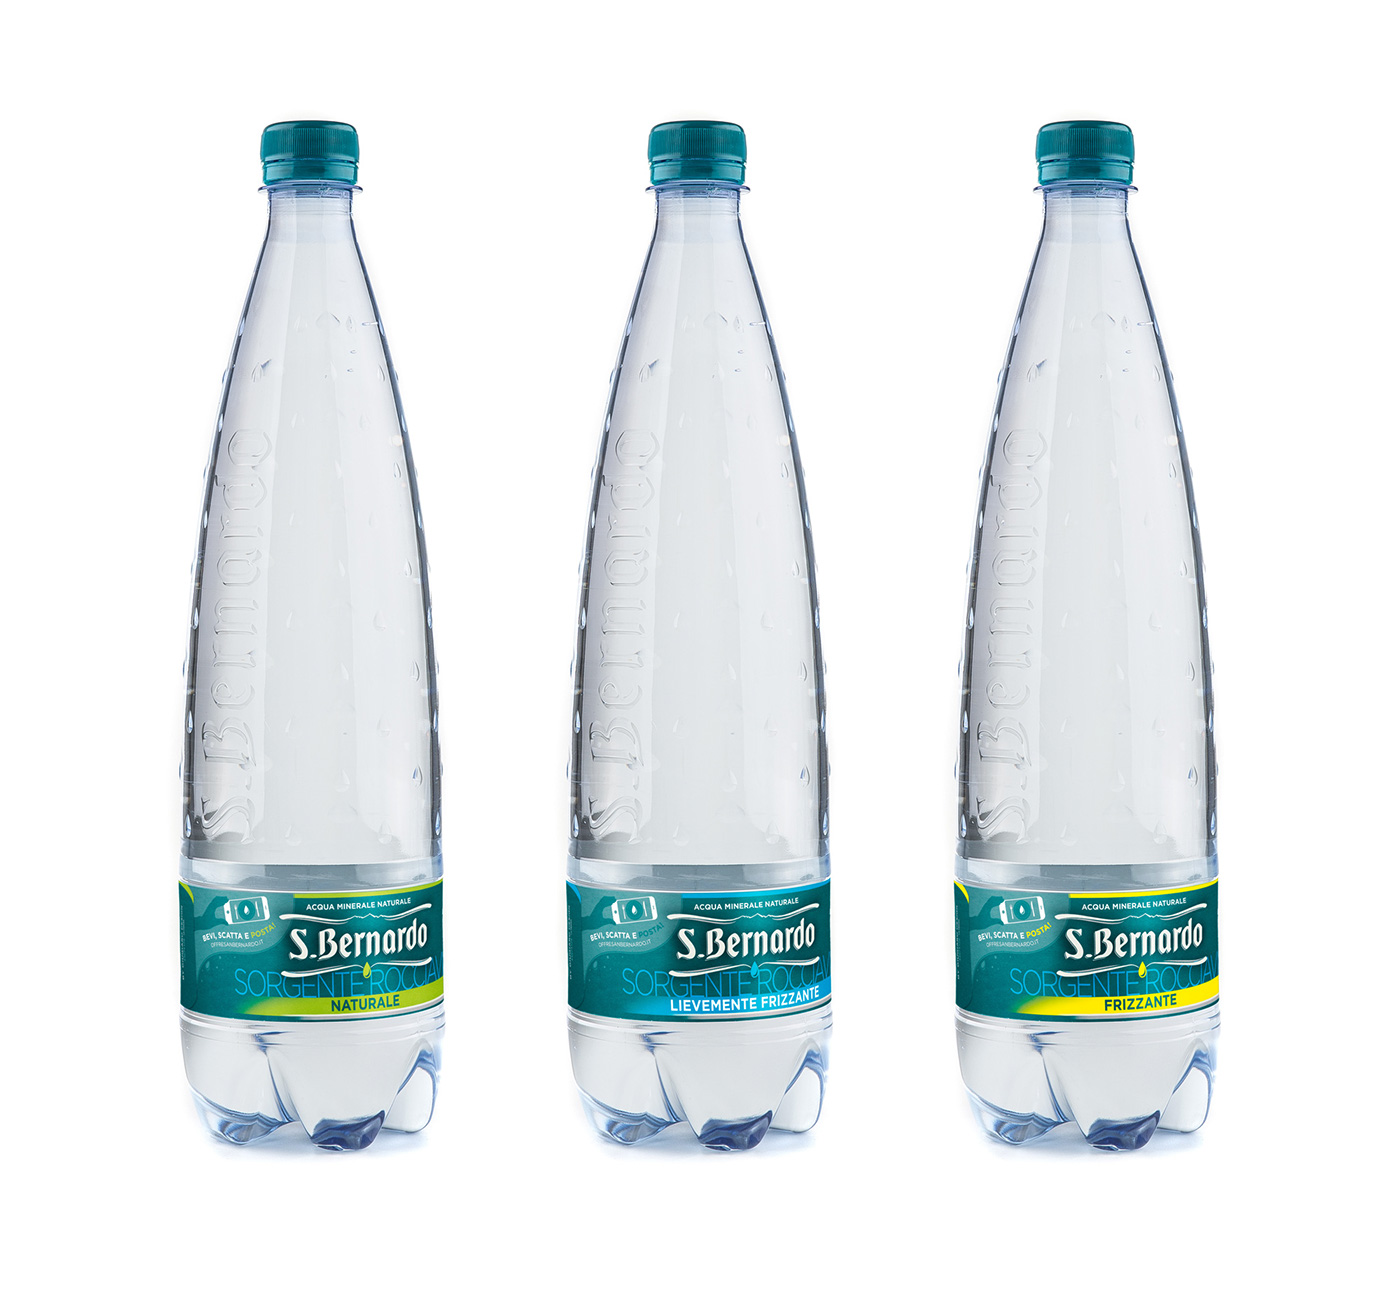 S.Bernardo made in italy mineral water contest water Website flyer ADV logo RESTYLING